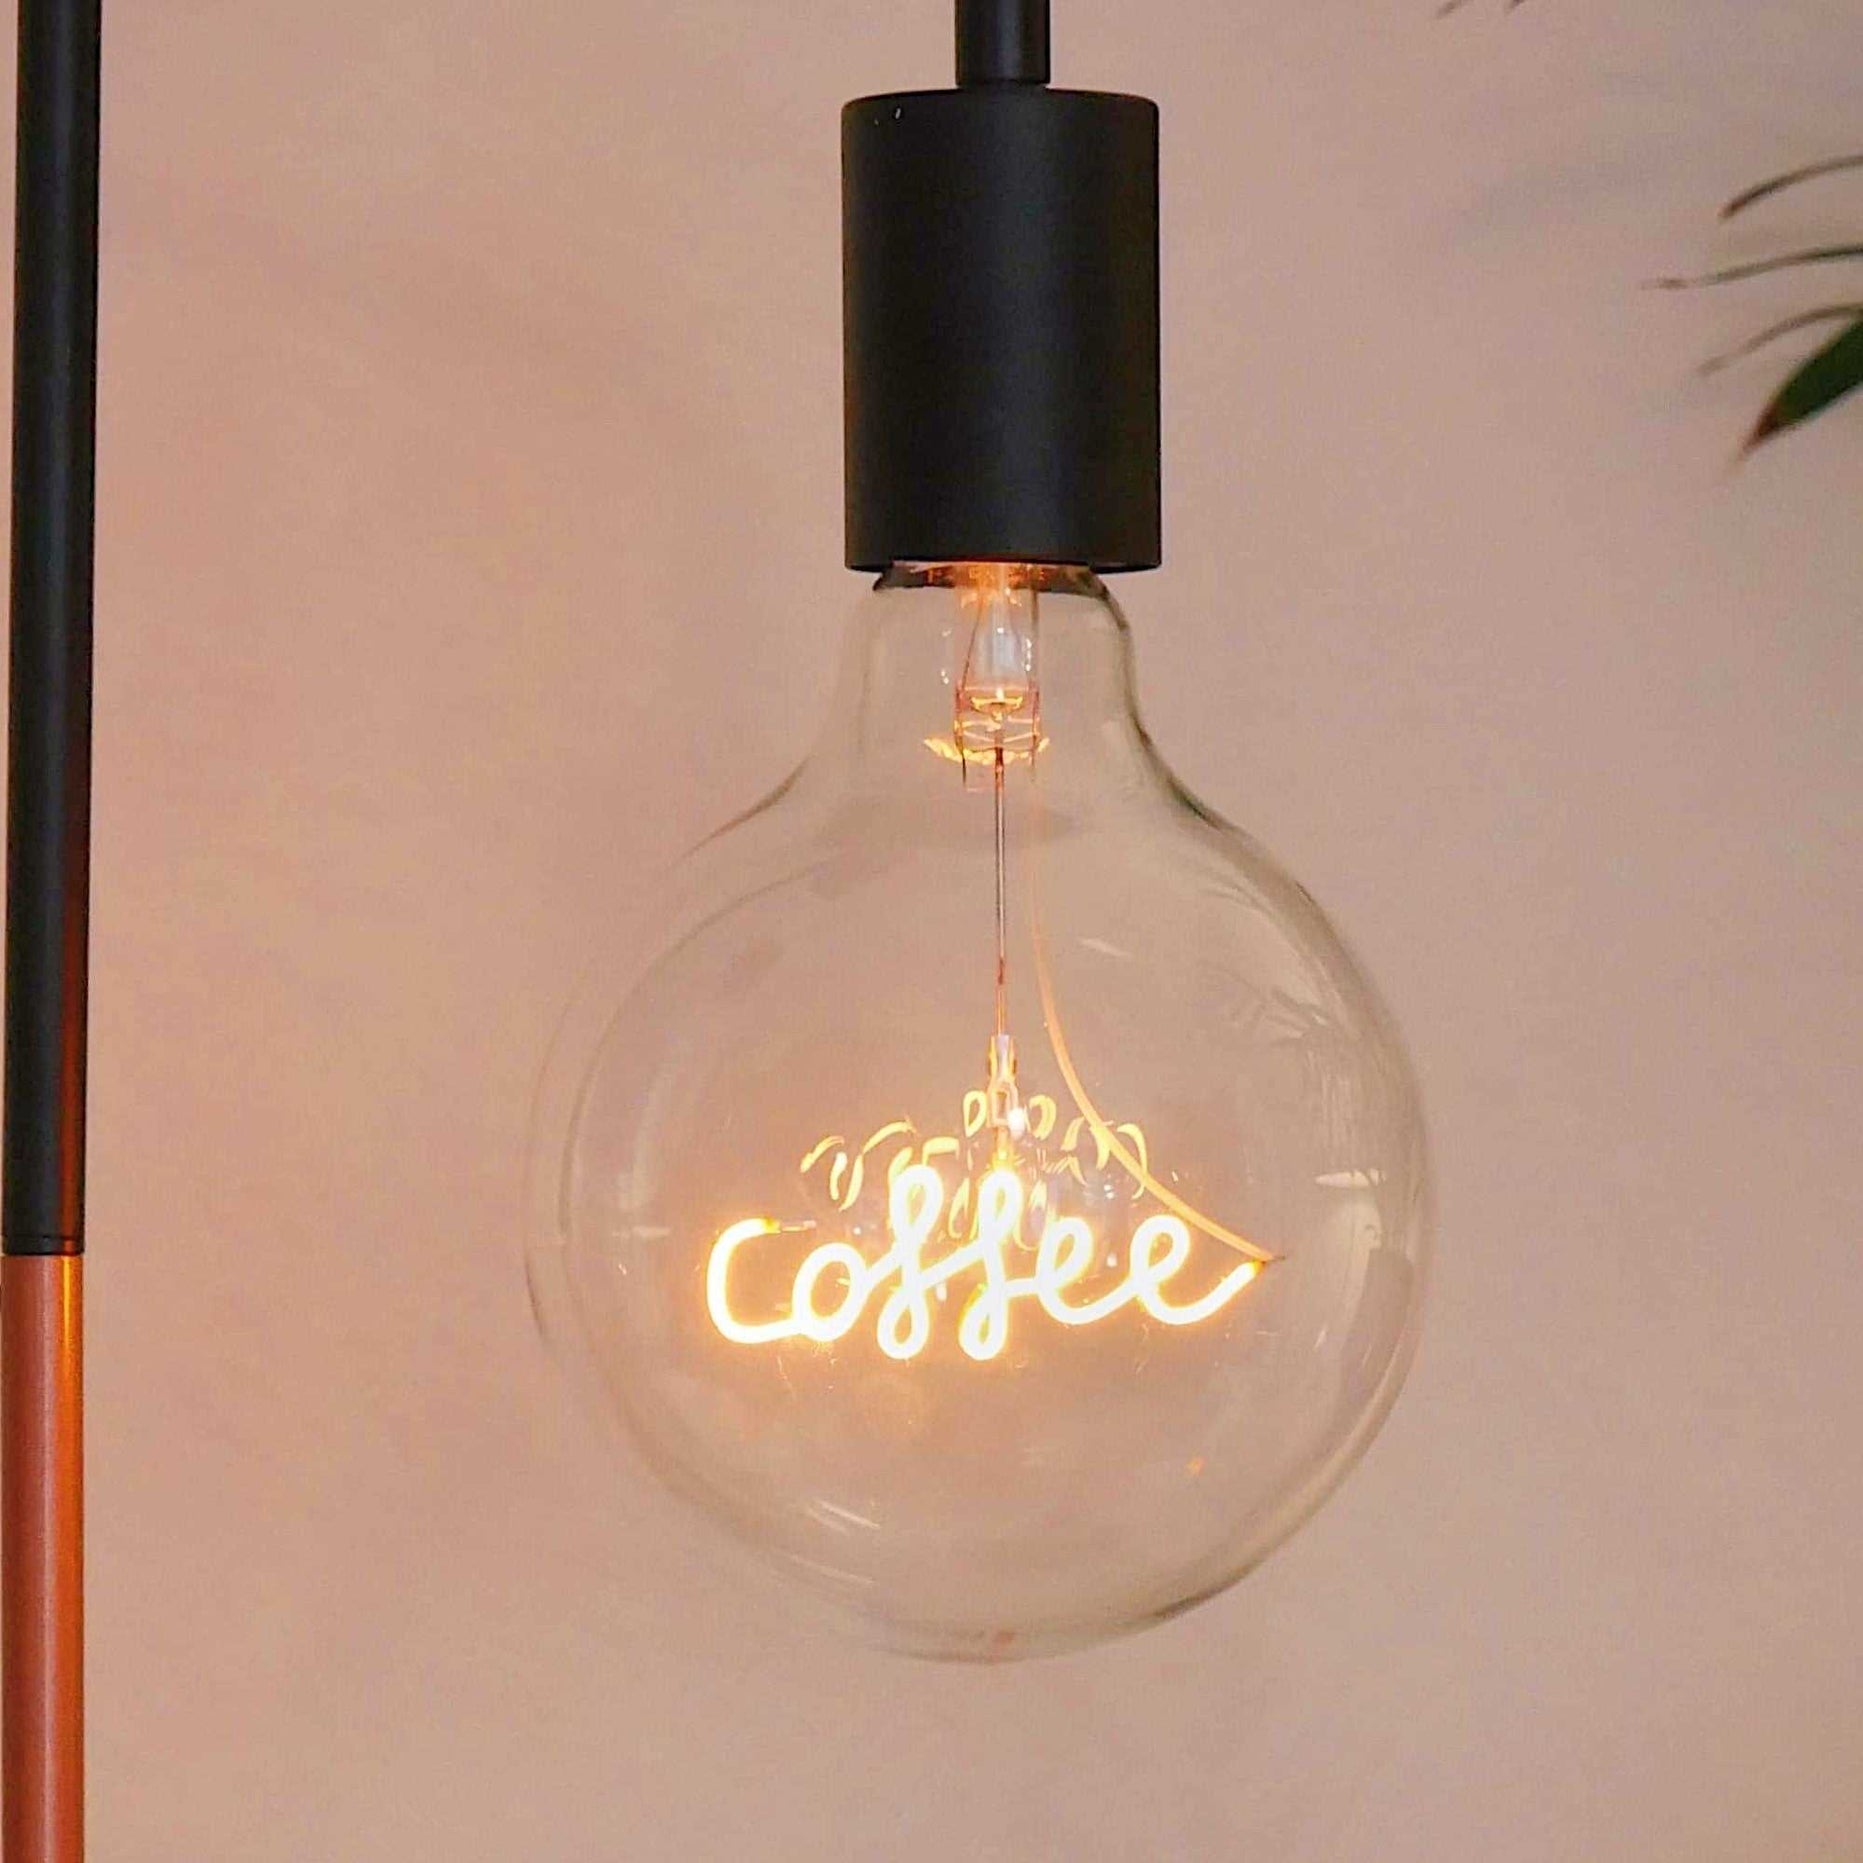 Coffee LED Light Bulb - Screw Up Pendant Fitting - E27 Edison Dimmable